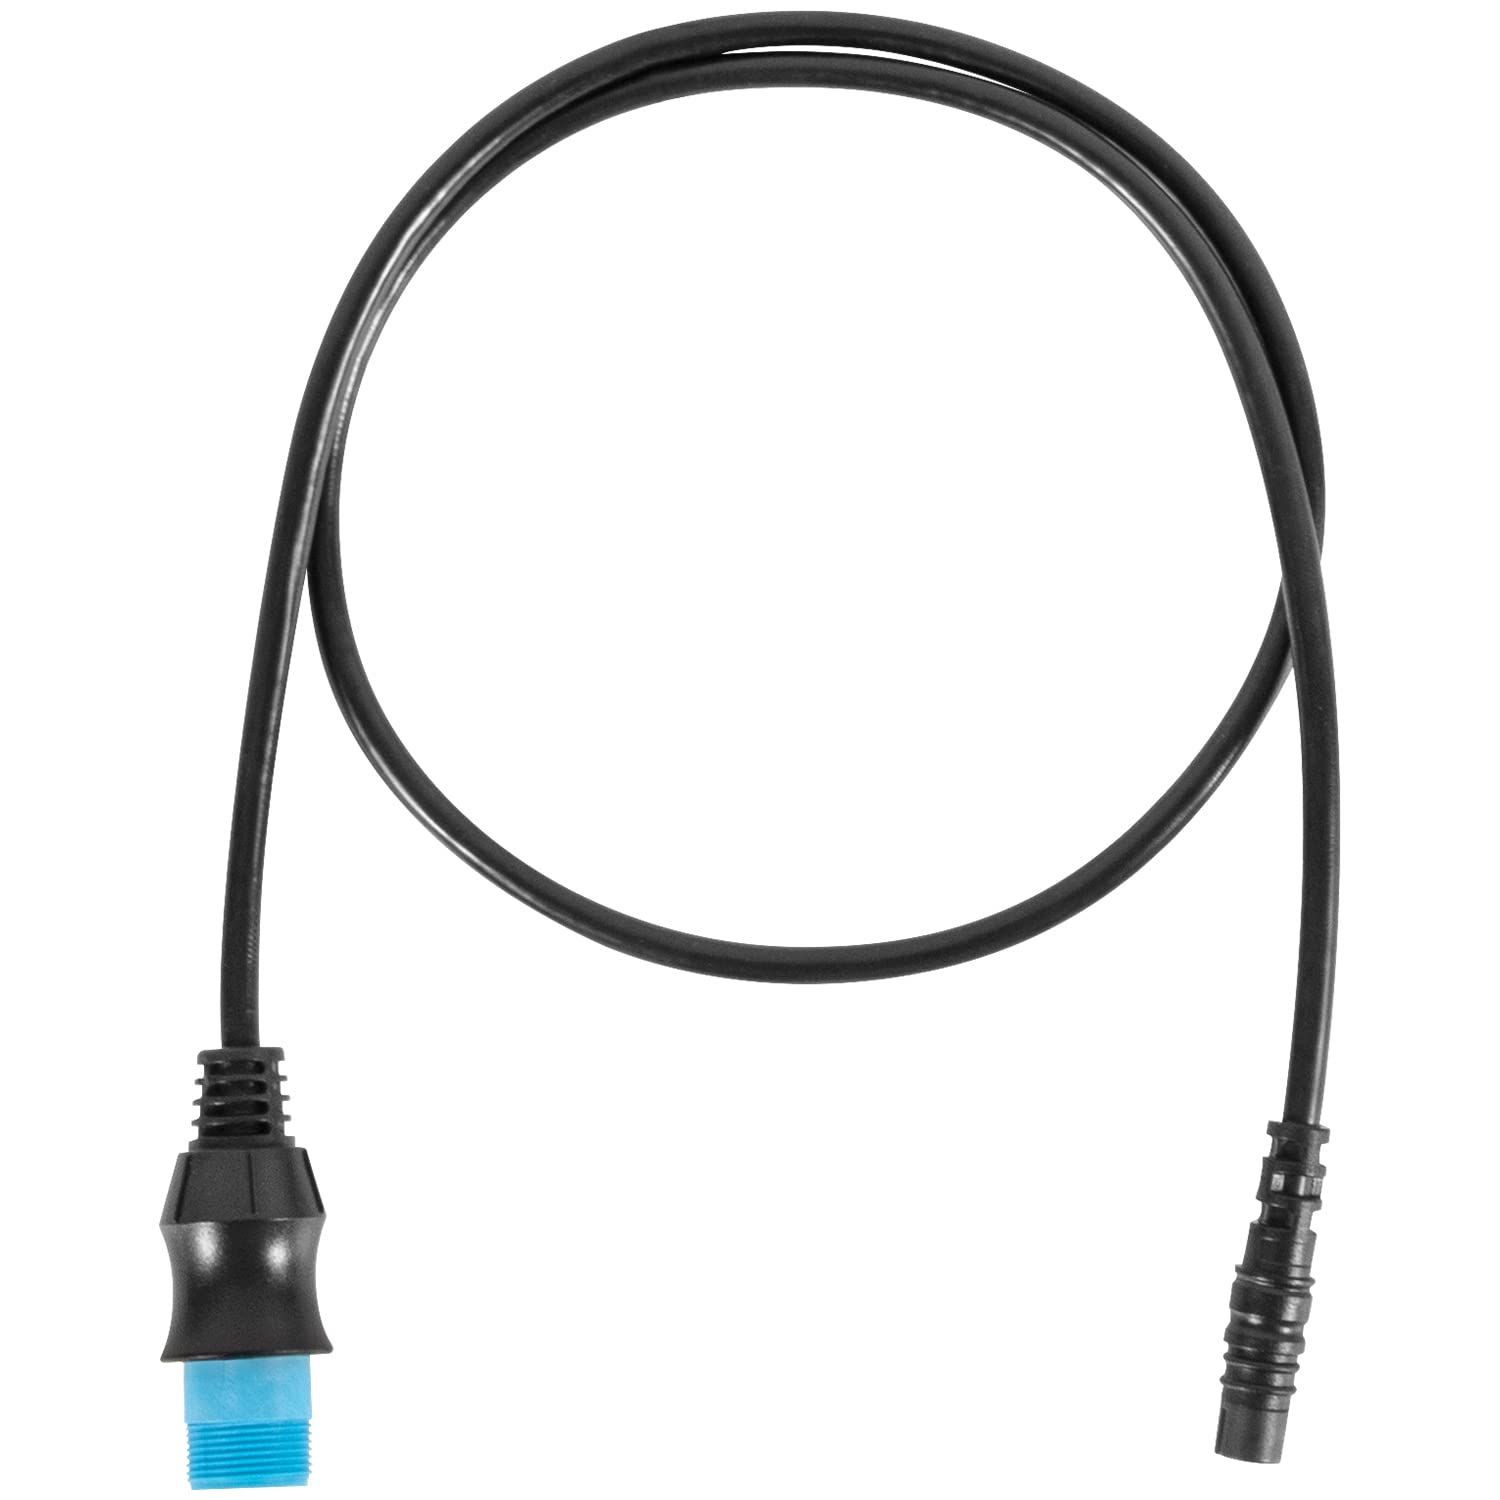 USSKYBOY 0101271900 8-pin Transducer to 4-pin Sounder Adapter Cable for ECHOMAP Series, for Striker Series